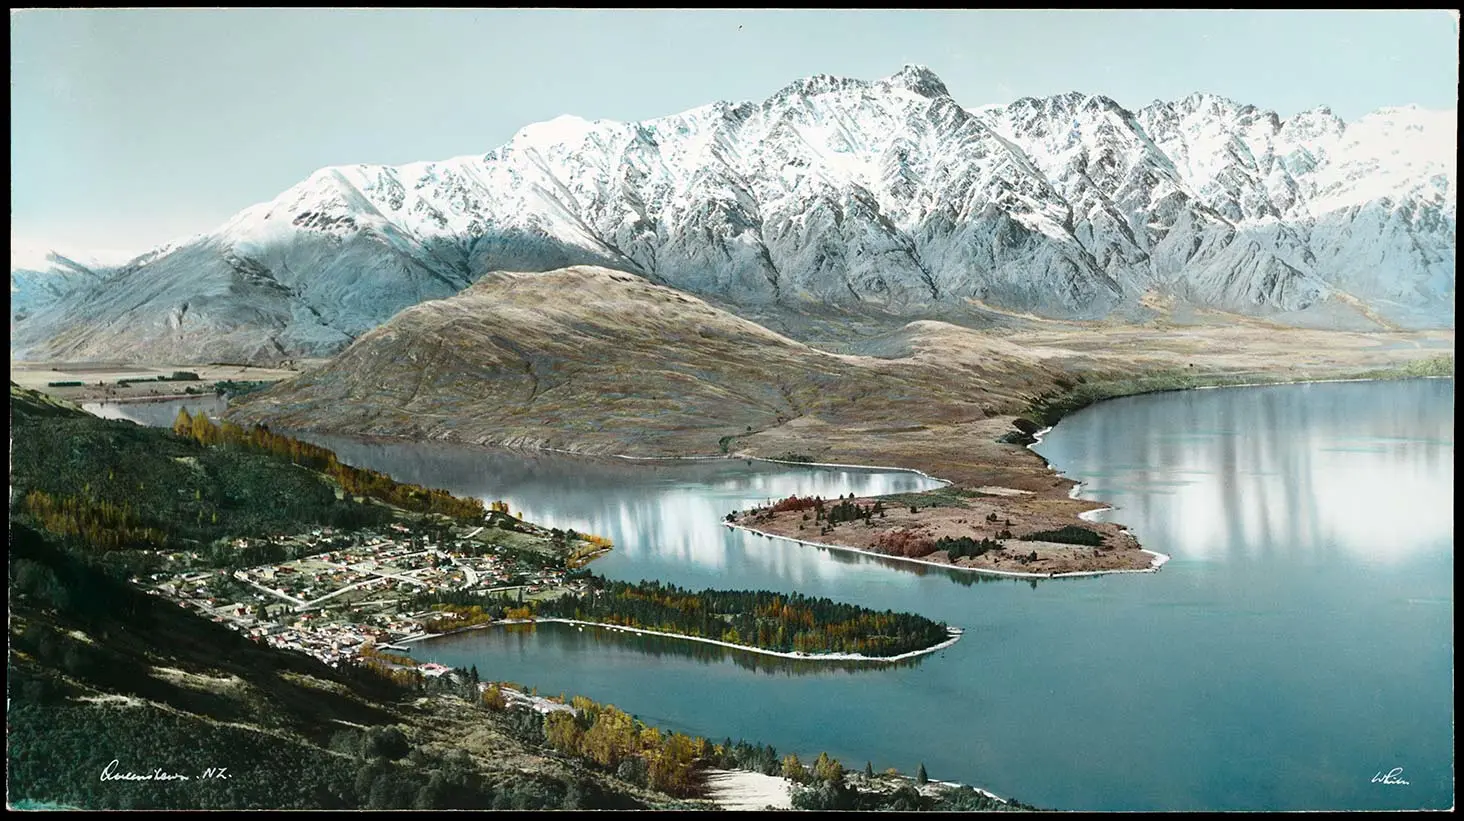 Hand-coloured photo showing an aerial view of Queenstown, Lake Wakatipu and surrounding mountains.